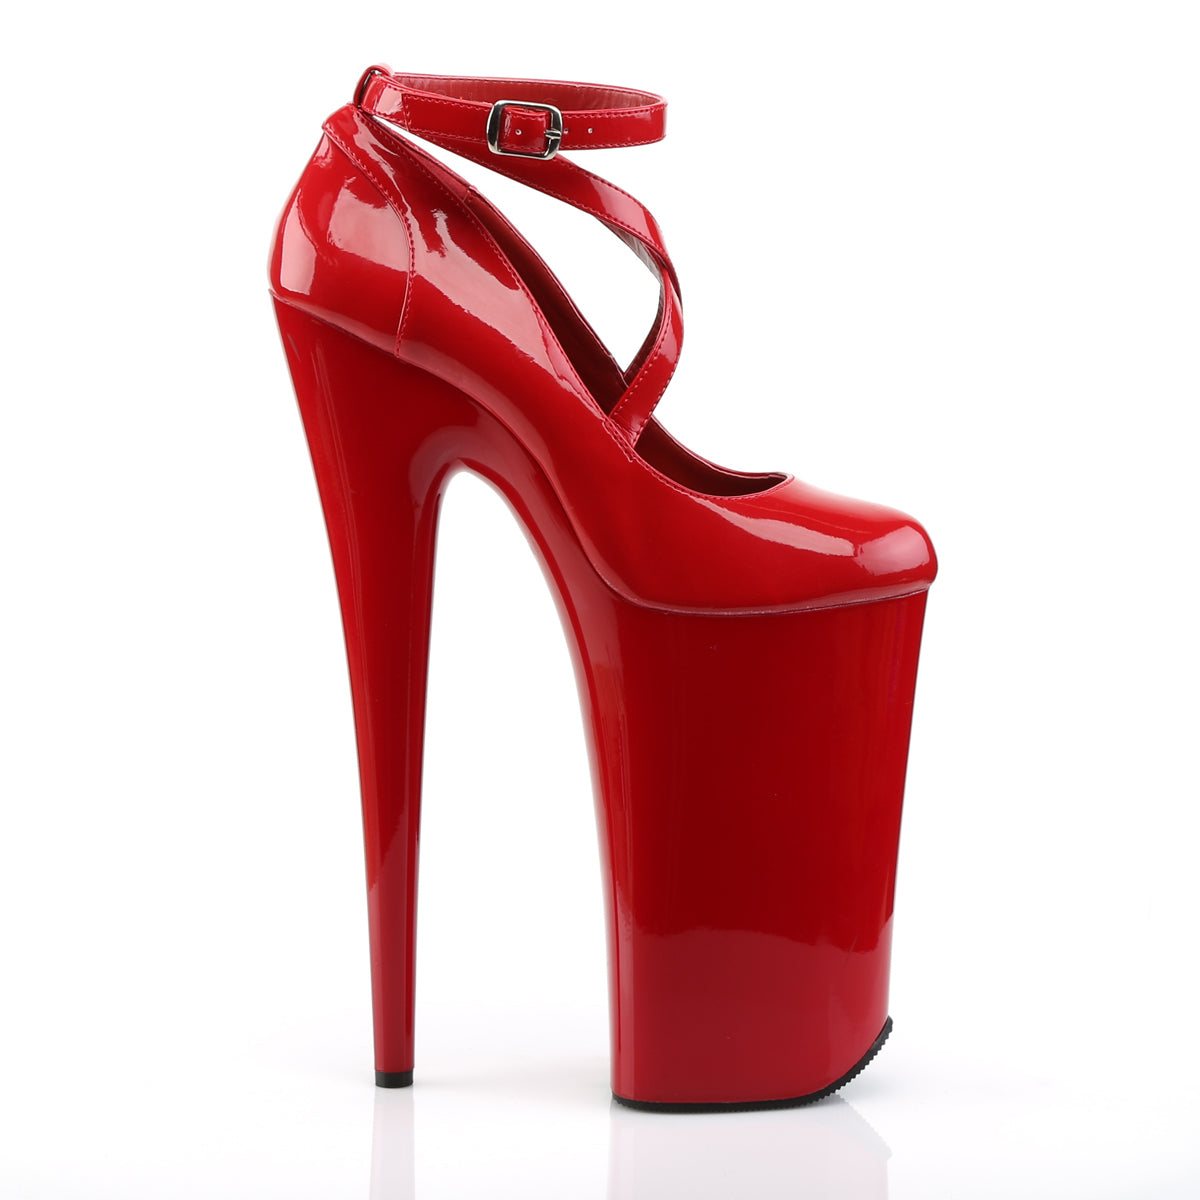 BEYOND-087 Pleasers Sexy 10" Heel Red Pole Dancing Platforms-Pleaser- Sexy Shoes Fetish Heels